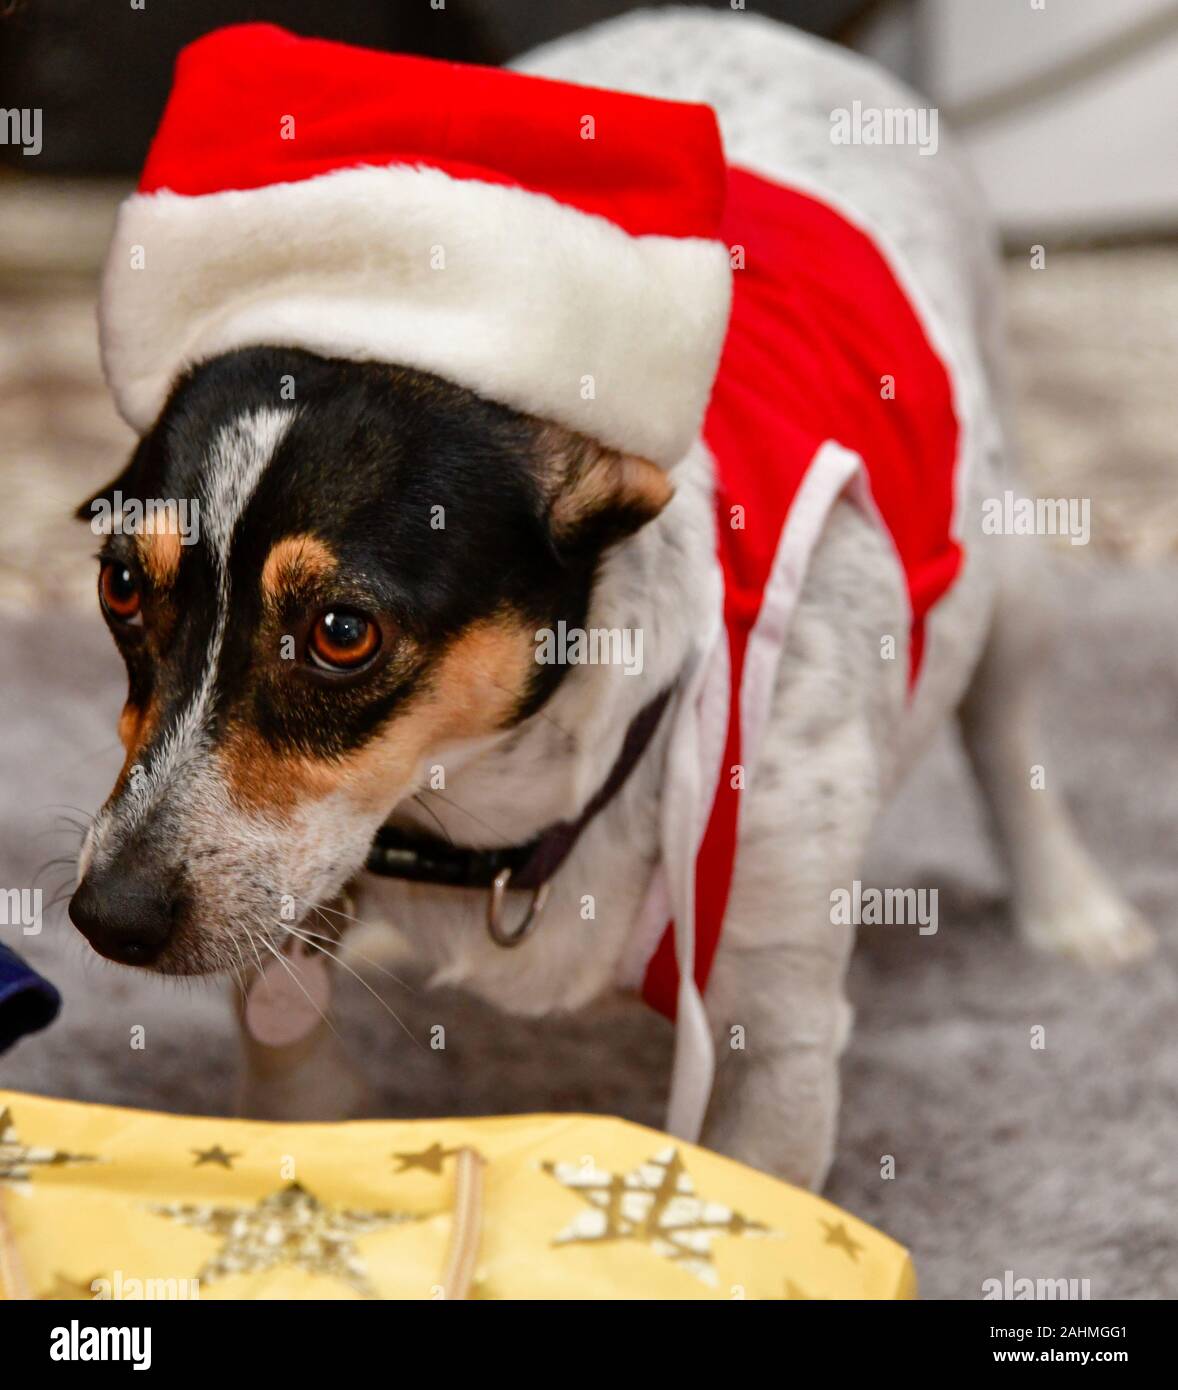 Cute Jack Russel Puppy Dog Dressed as Santa on Christmas Day Stock Photo